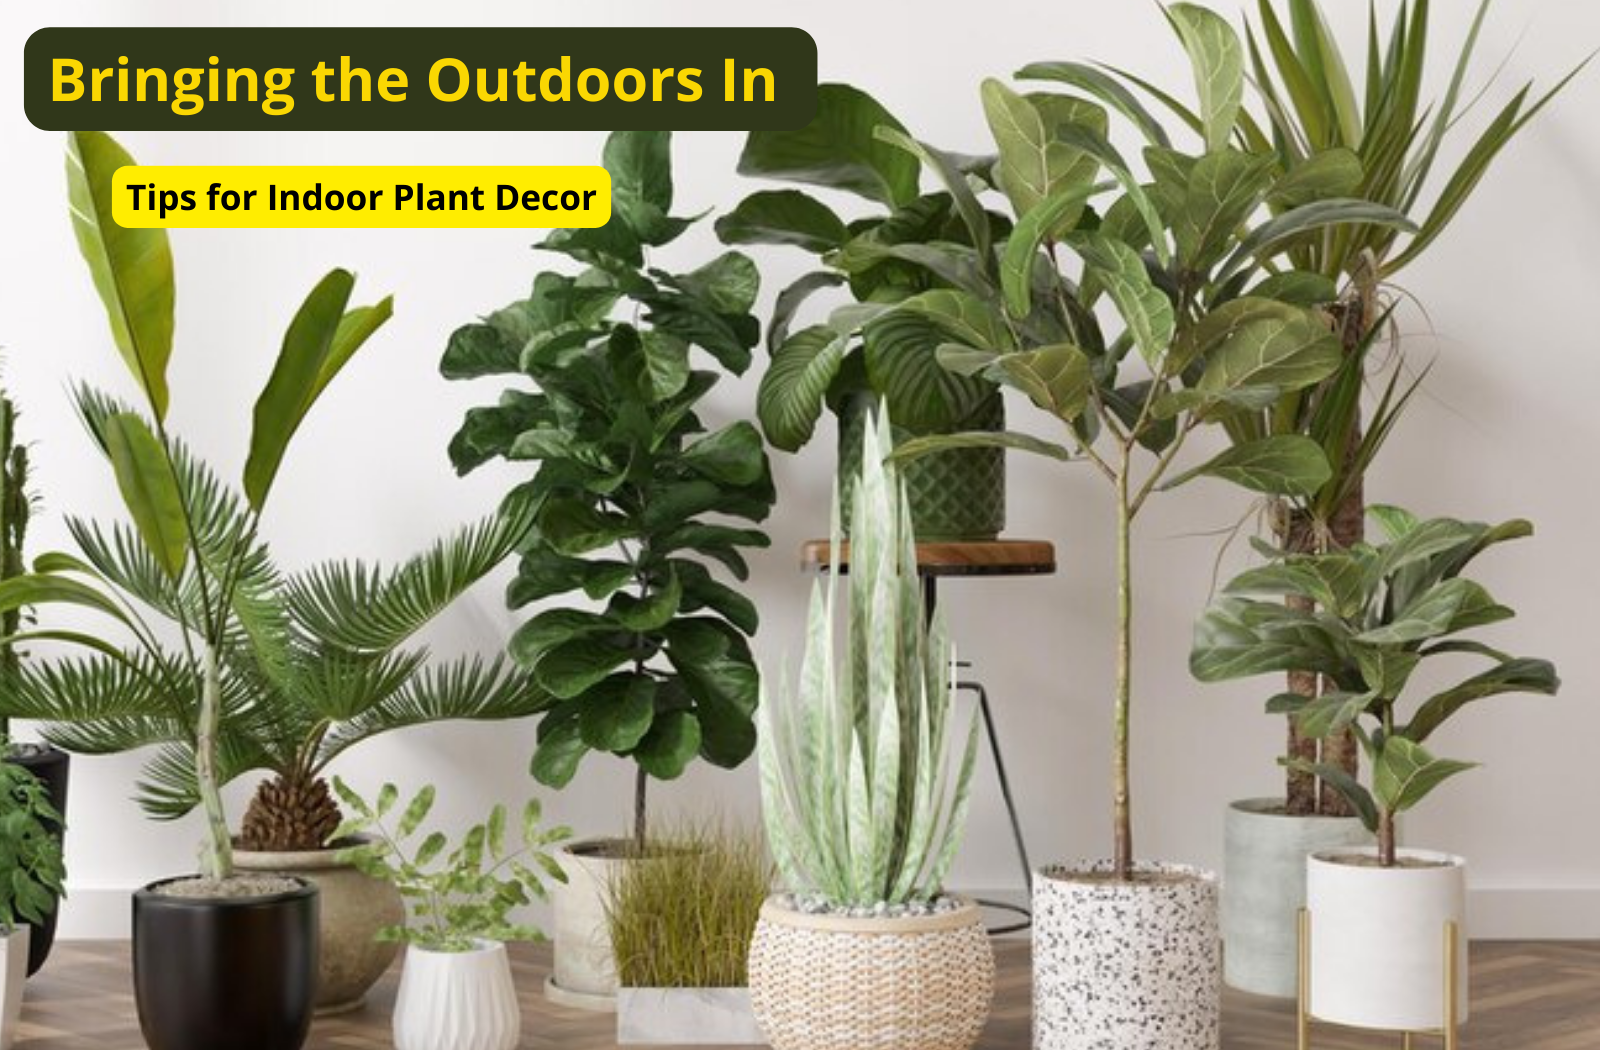 Bringing the Outdoors In: Tips for Indoor Plant Decor